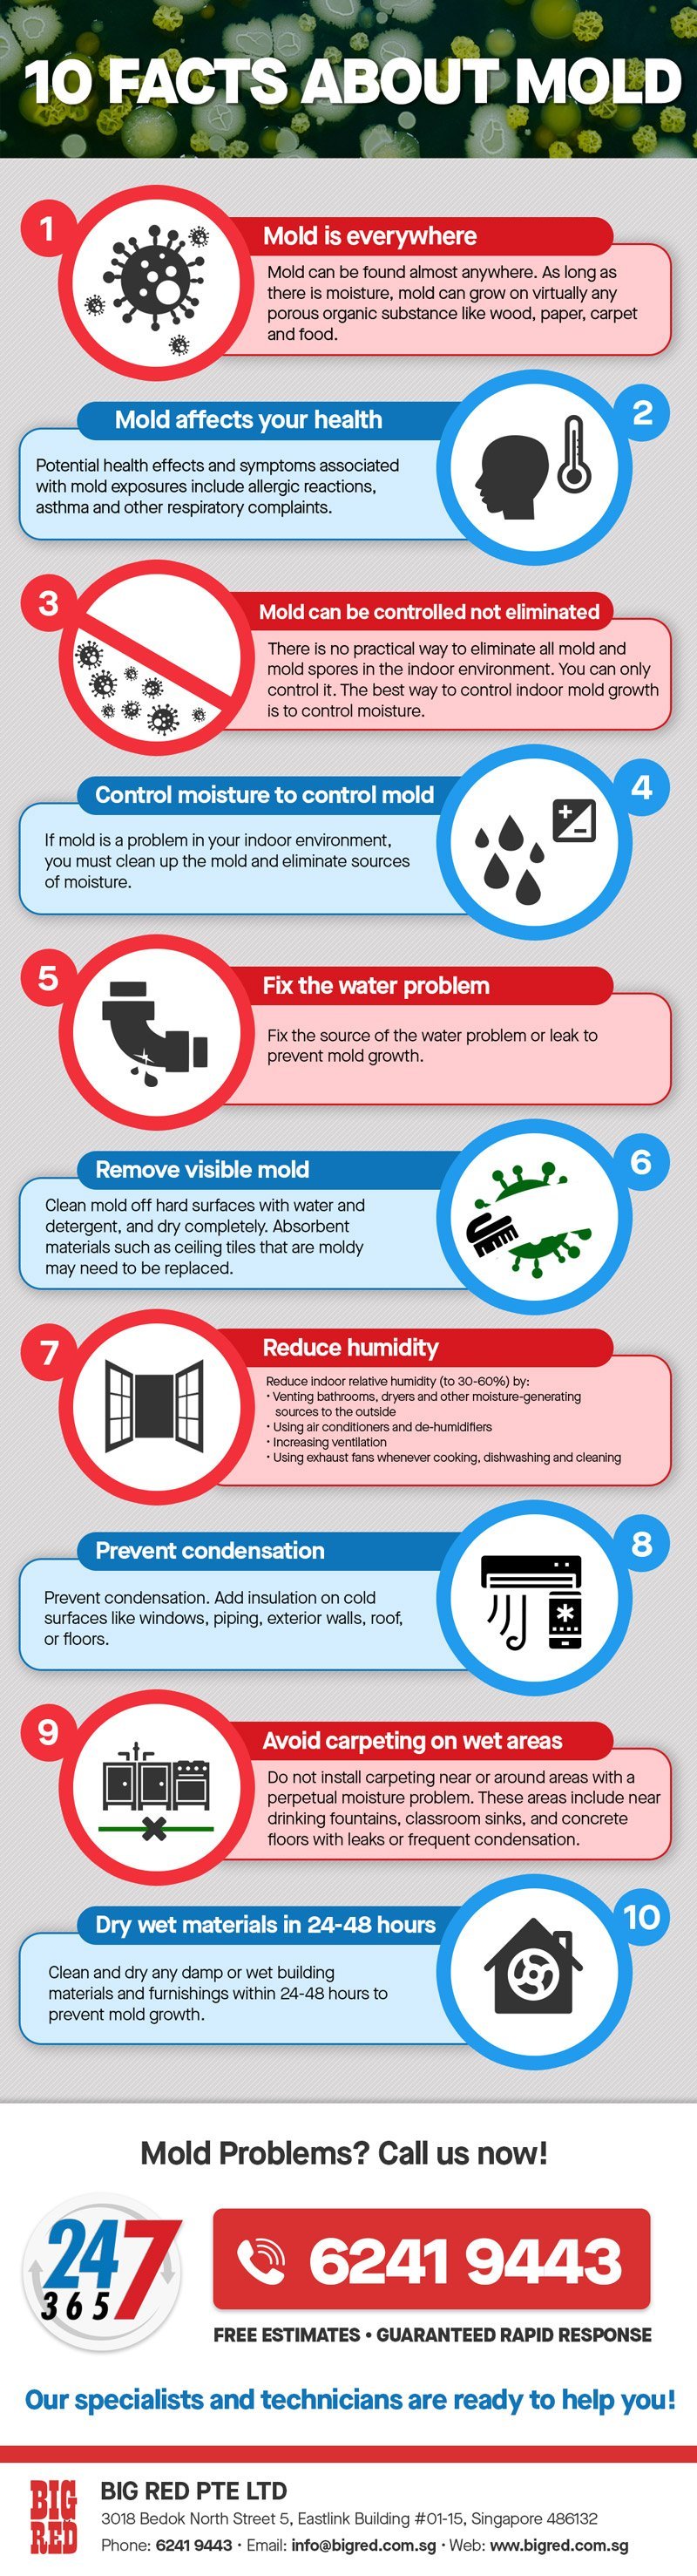 10 Facts You Should Know About Mold | Mold Infographic by Big Red Pte Ltd Singapore